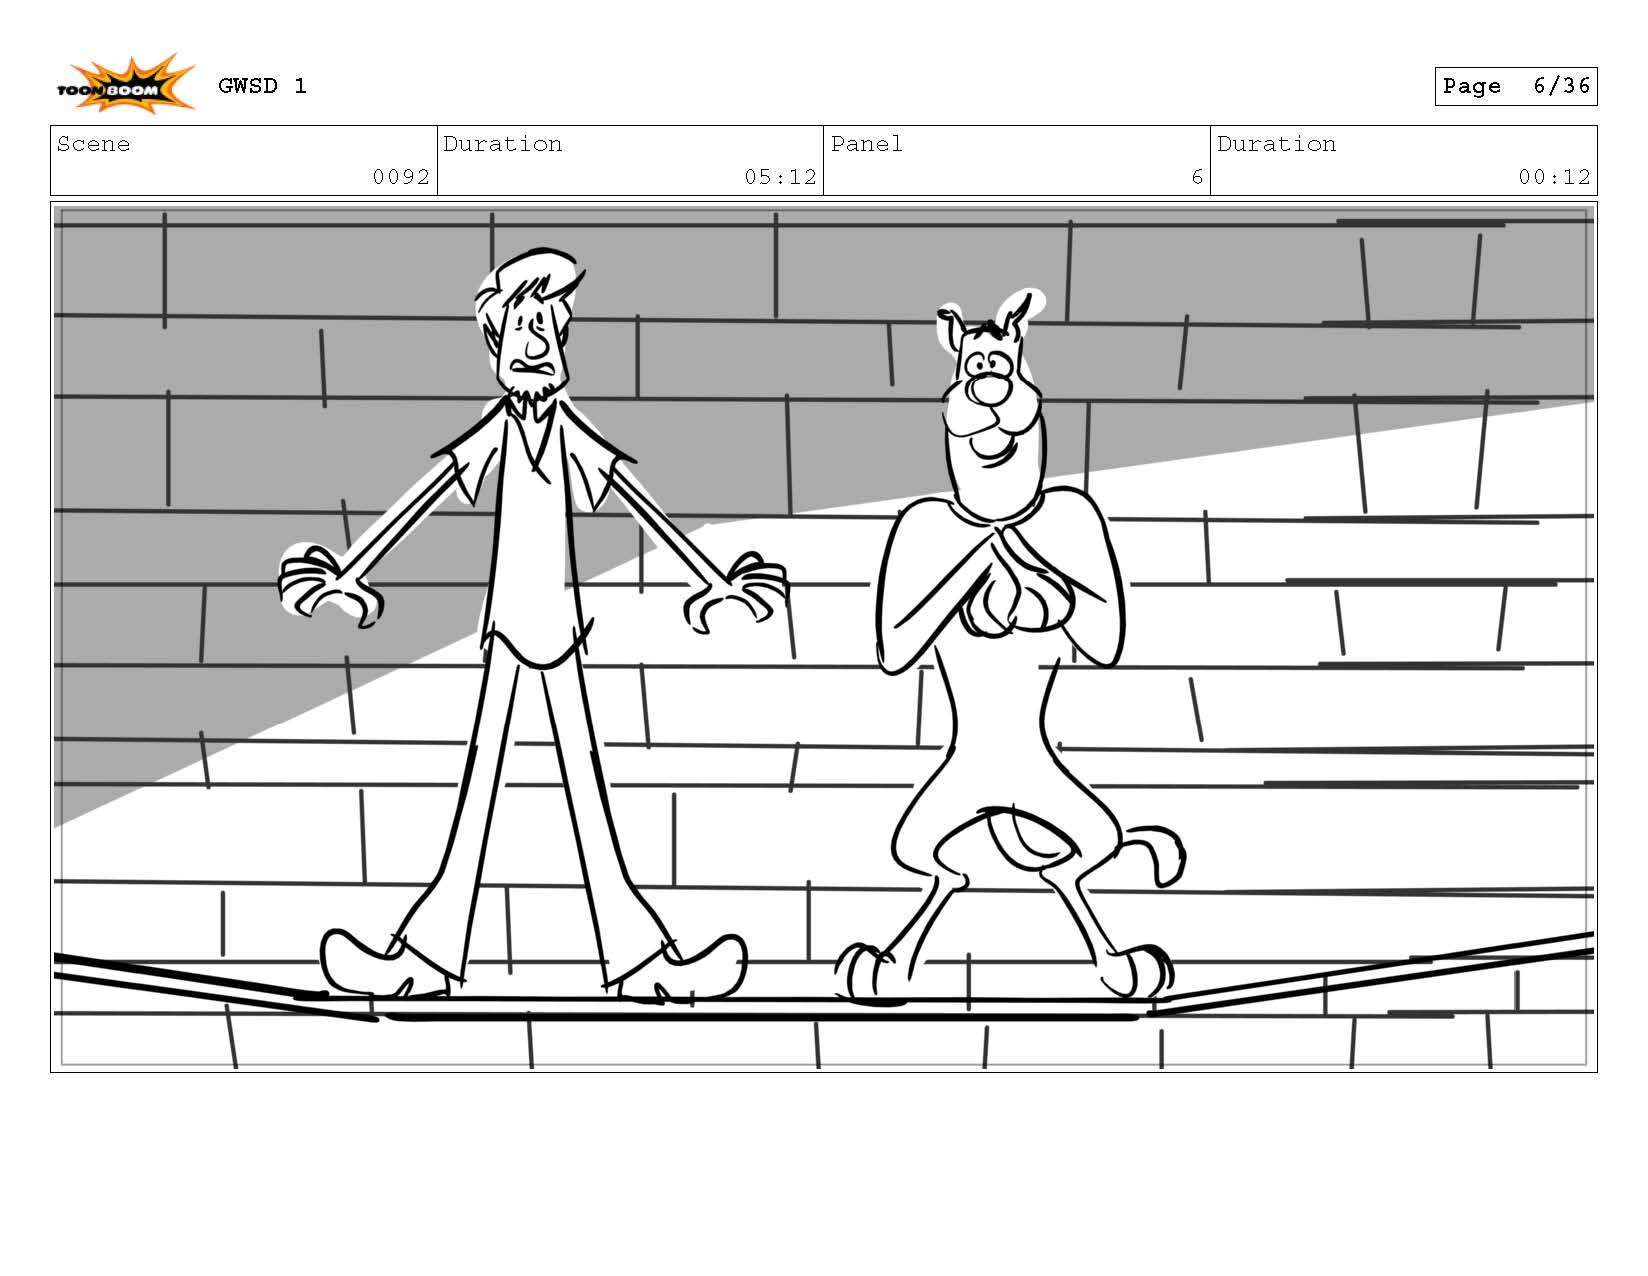 406_ScoobyDooGuessWho_Revisions_01_Page_06.jpg